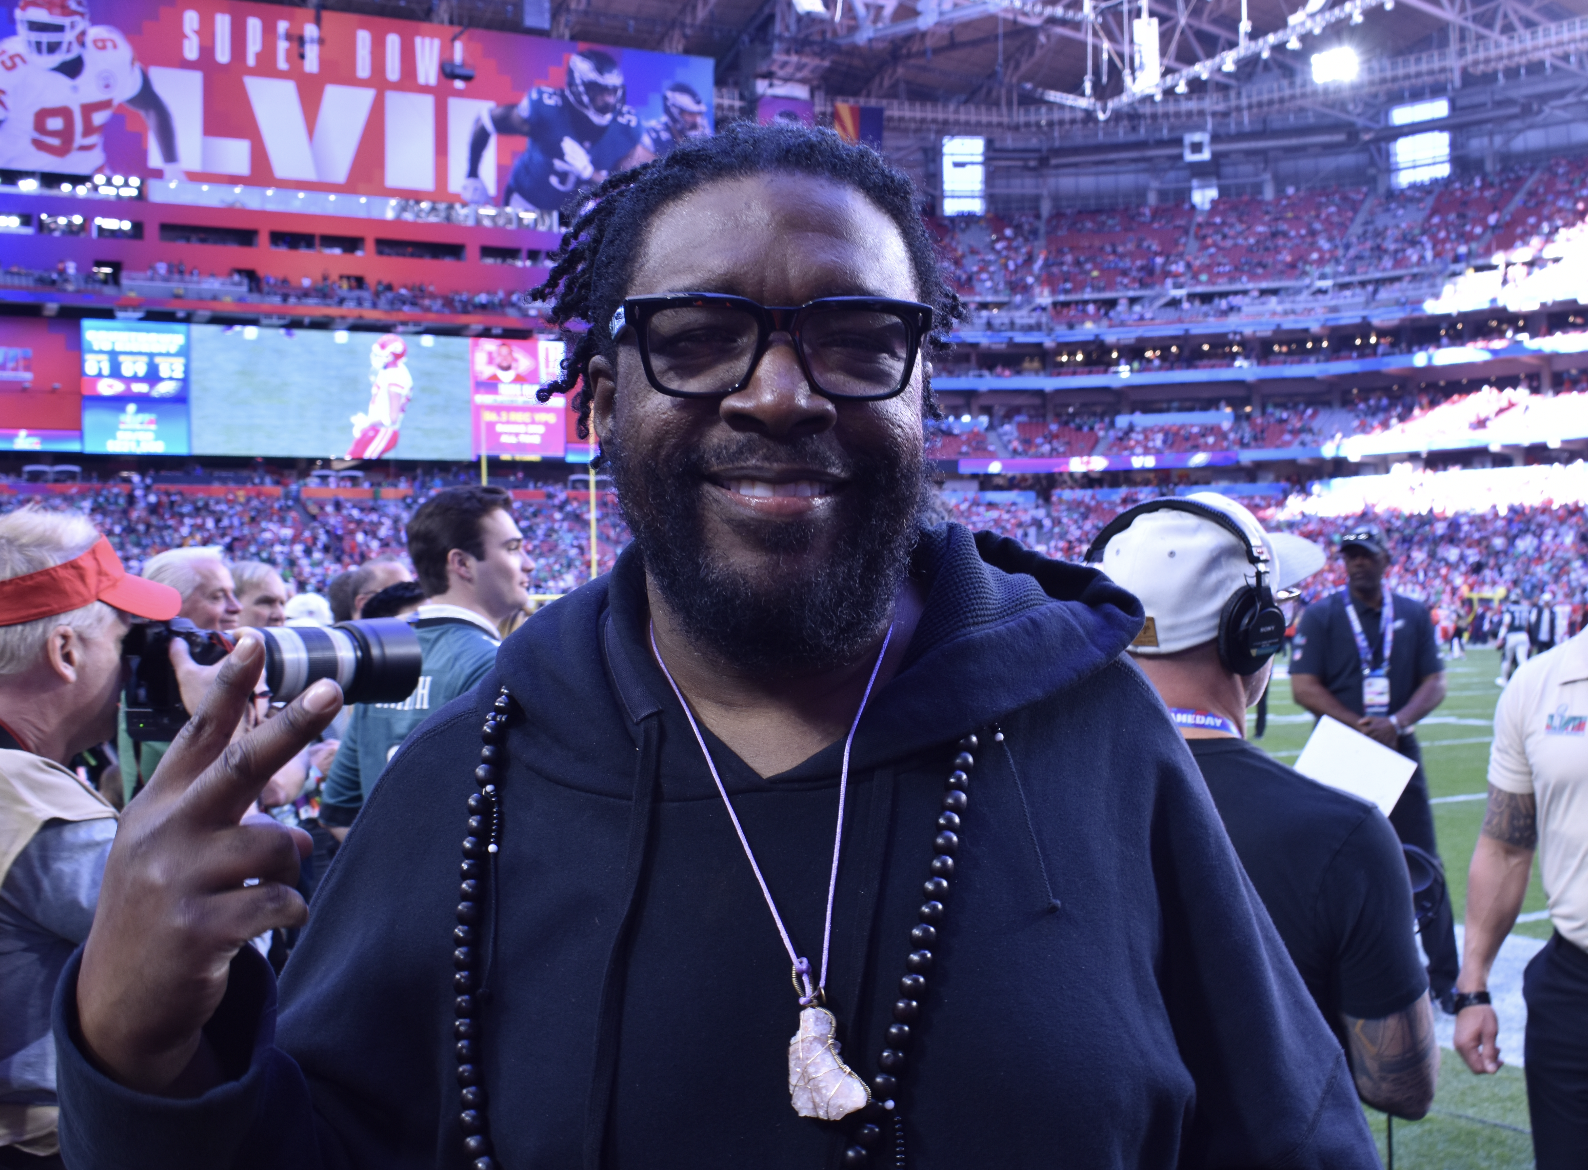 Questlove smiles and throws up the peace sign